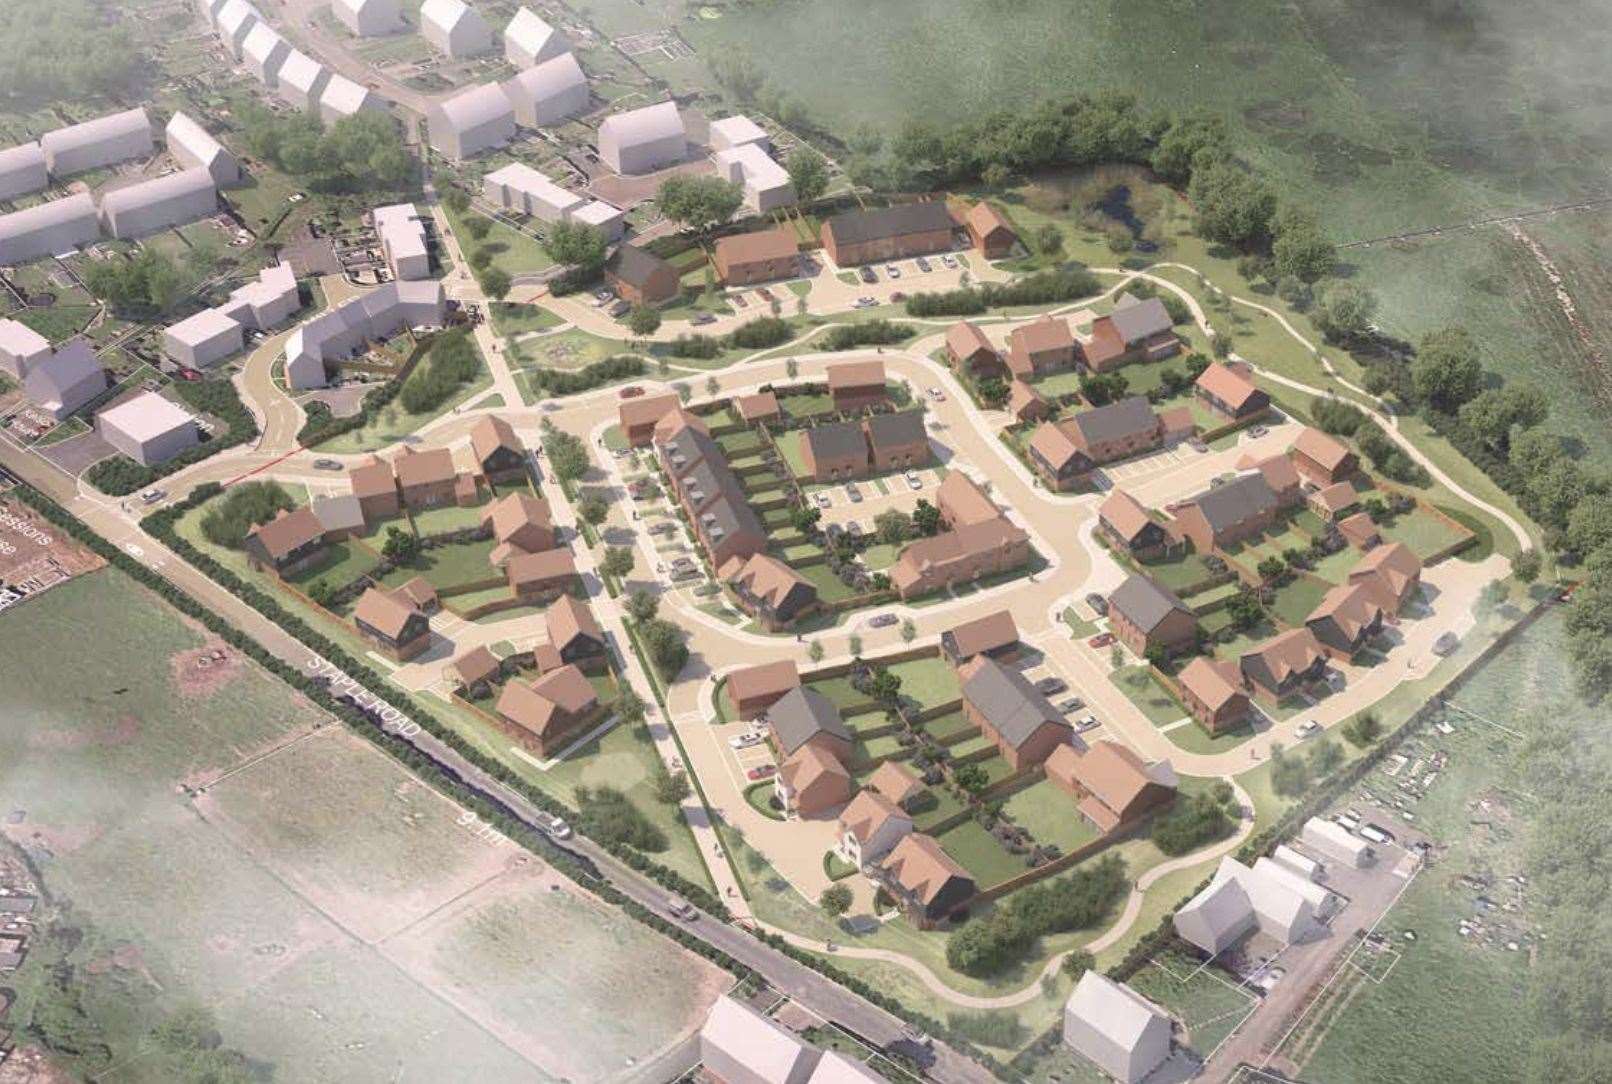 A CGI reveals how the 71 homes destined for Wingham could look